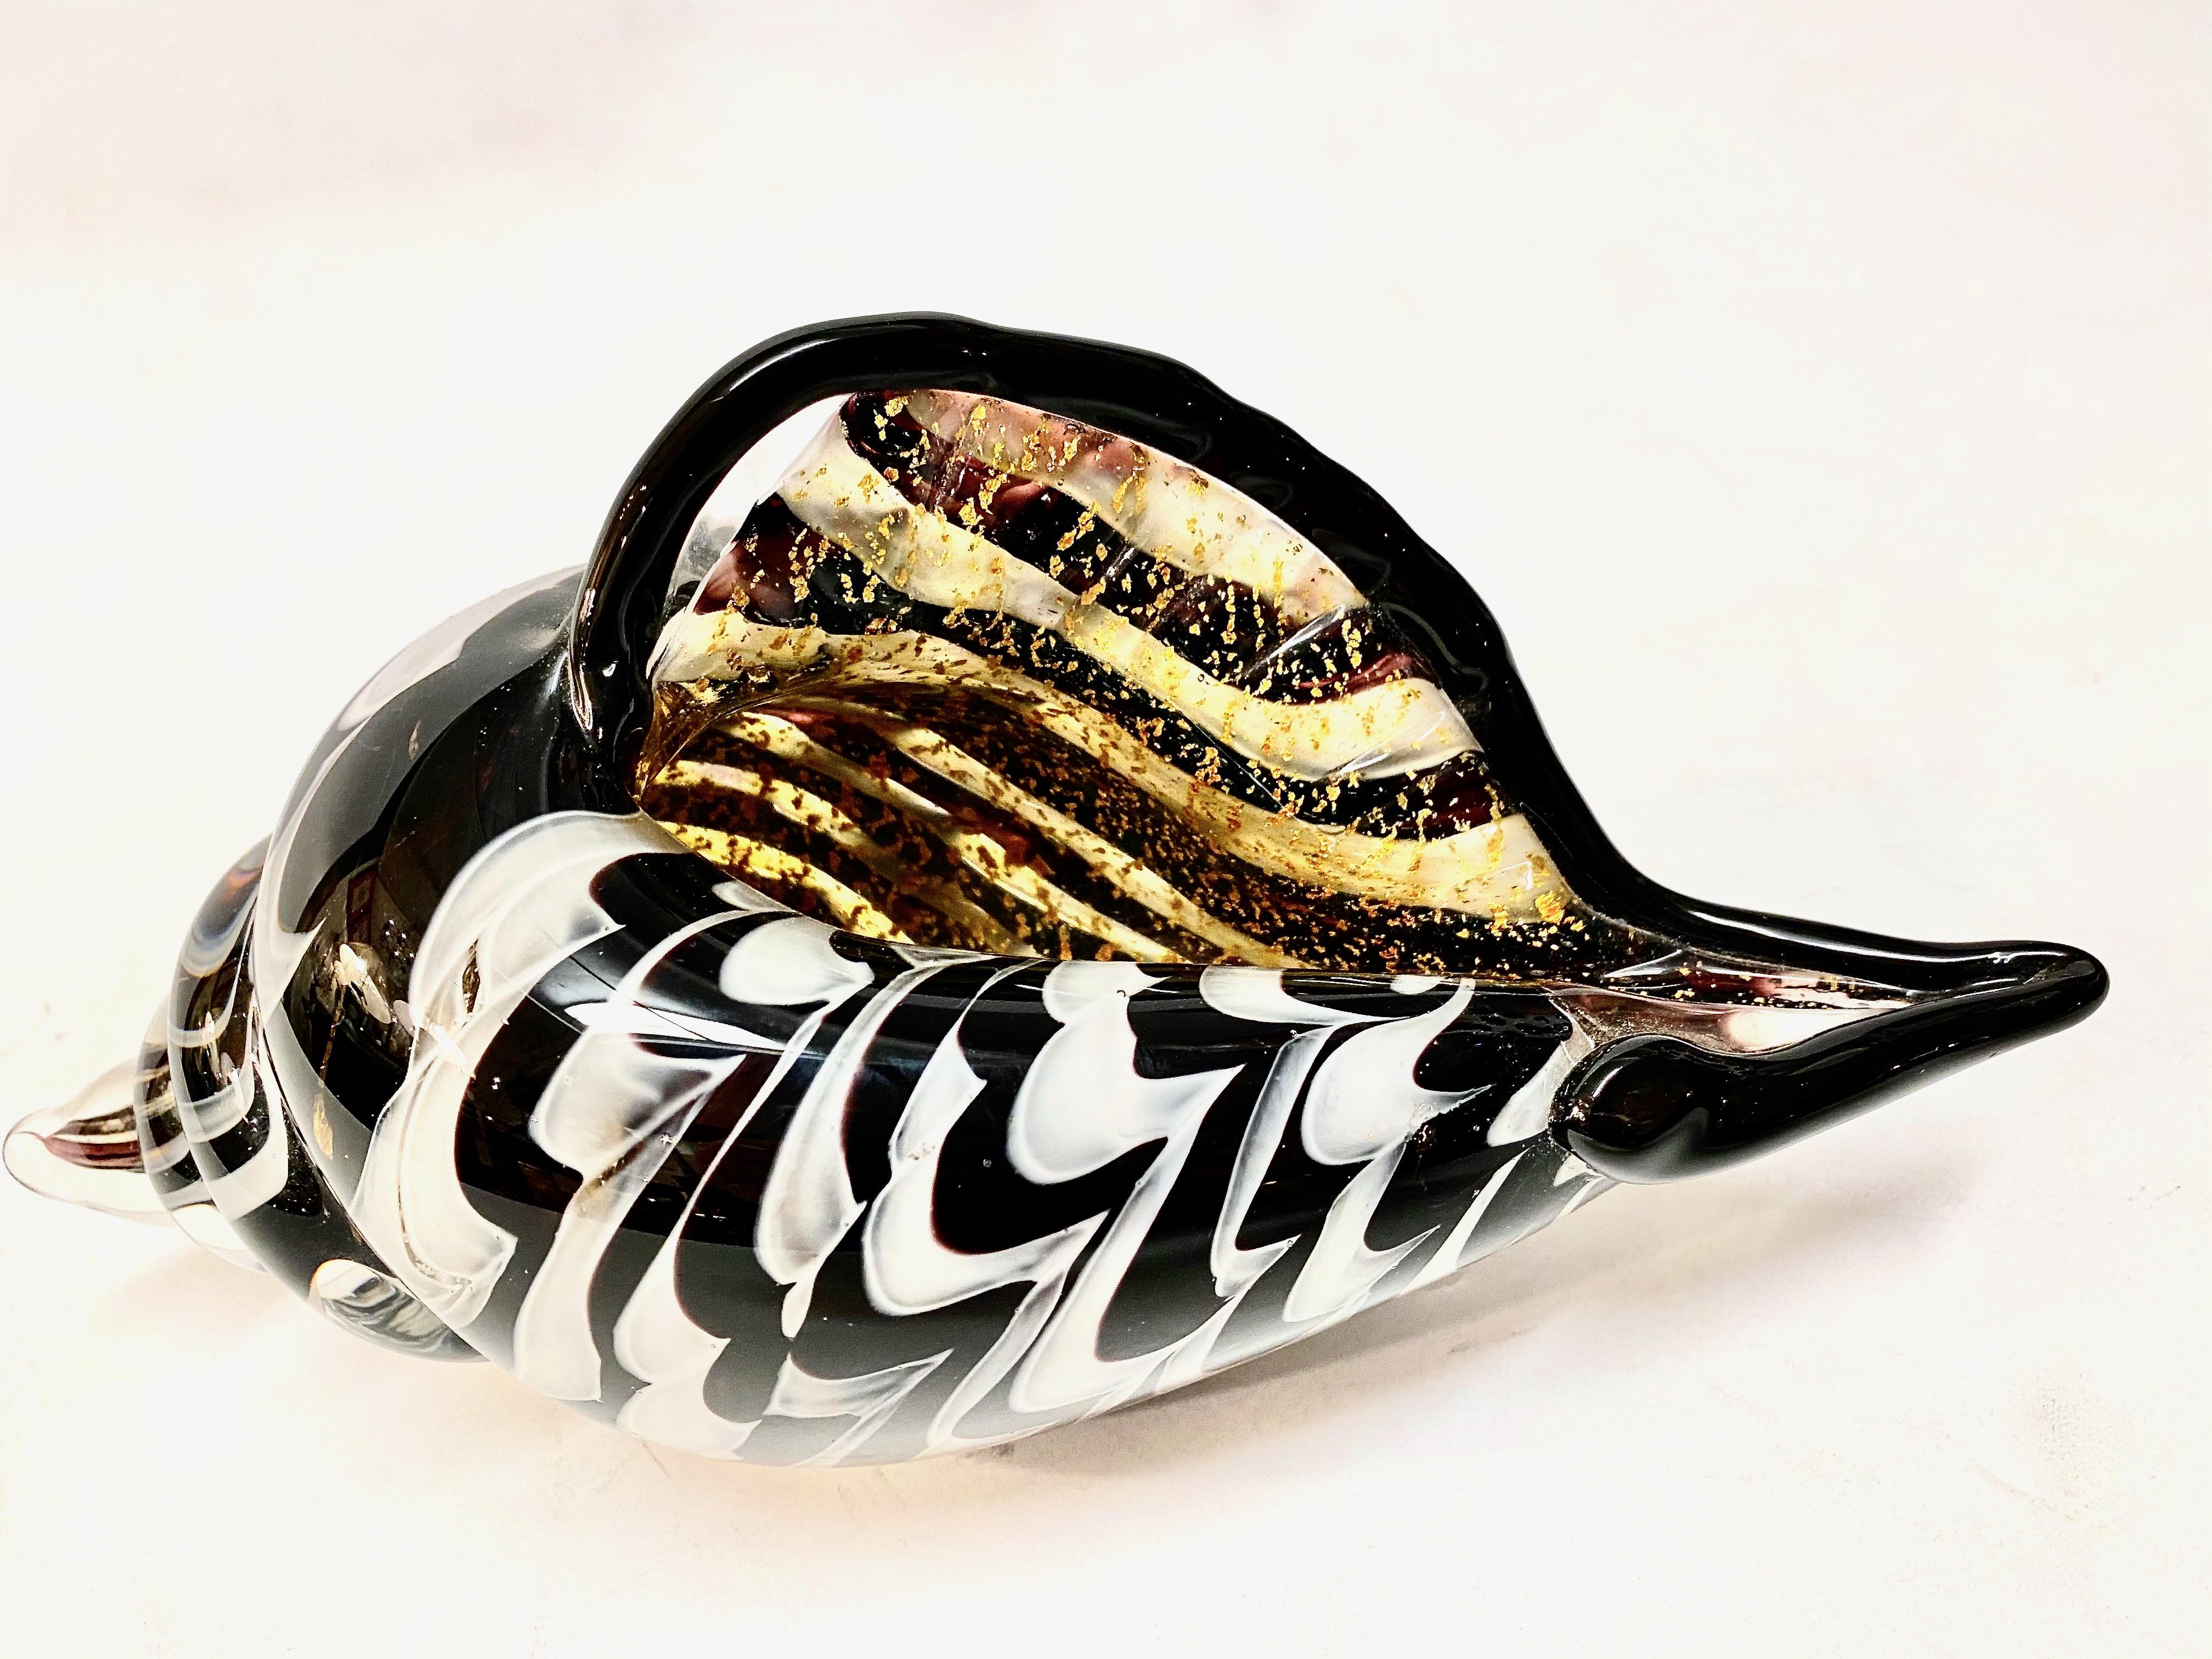 This is a good example of a c. 1960's Murano blown glass sea shell. The black and white design is highlighted by internal gold flecks. The large size of the shell together with the black & white contrasting glass makes this a very chic design